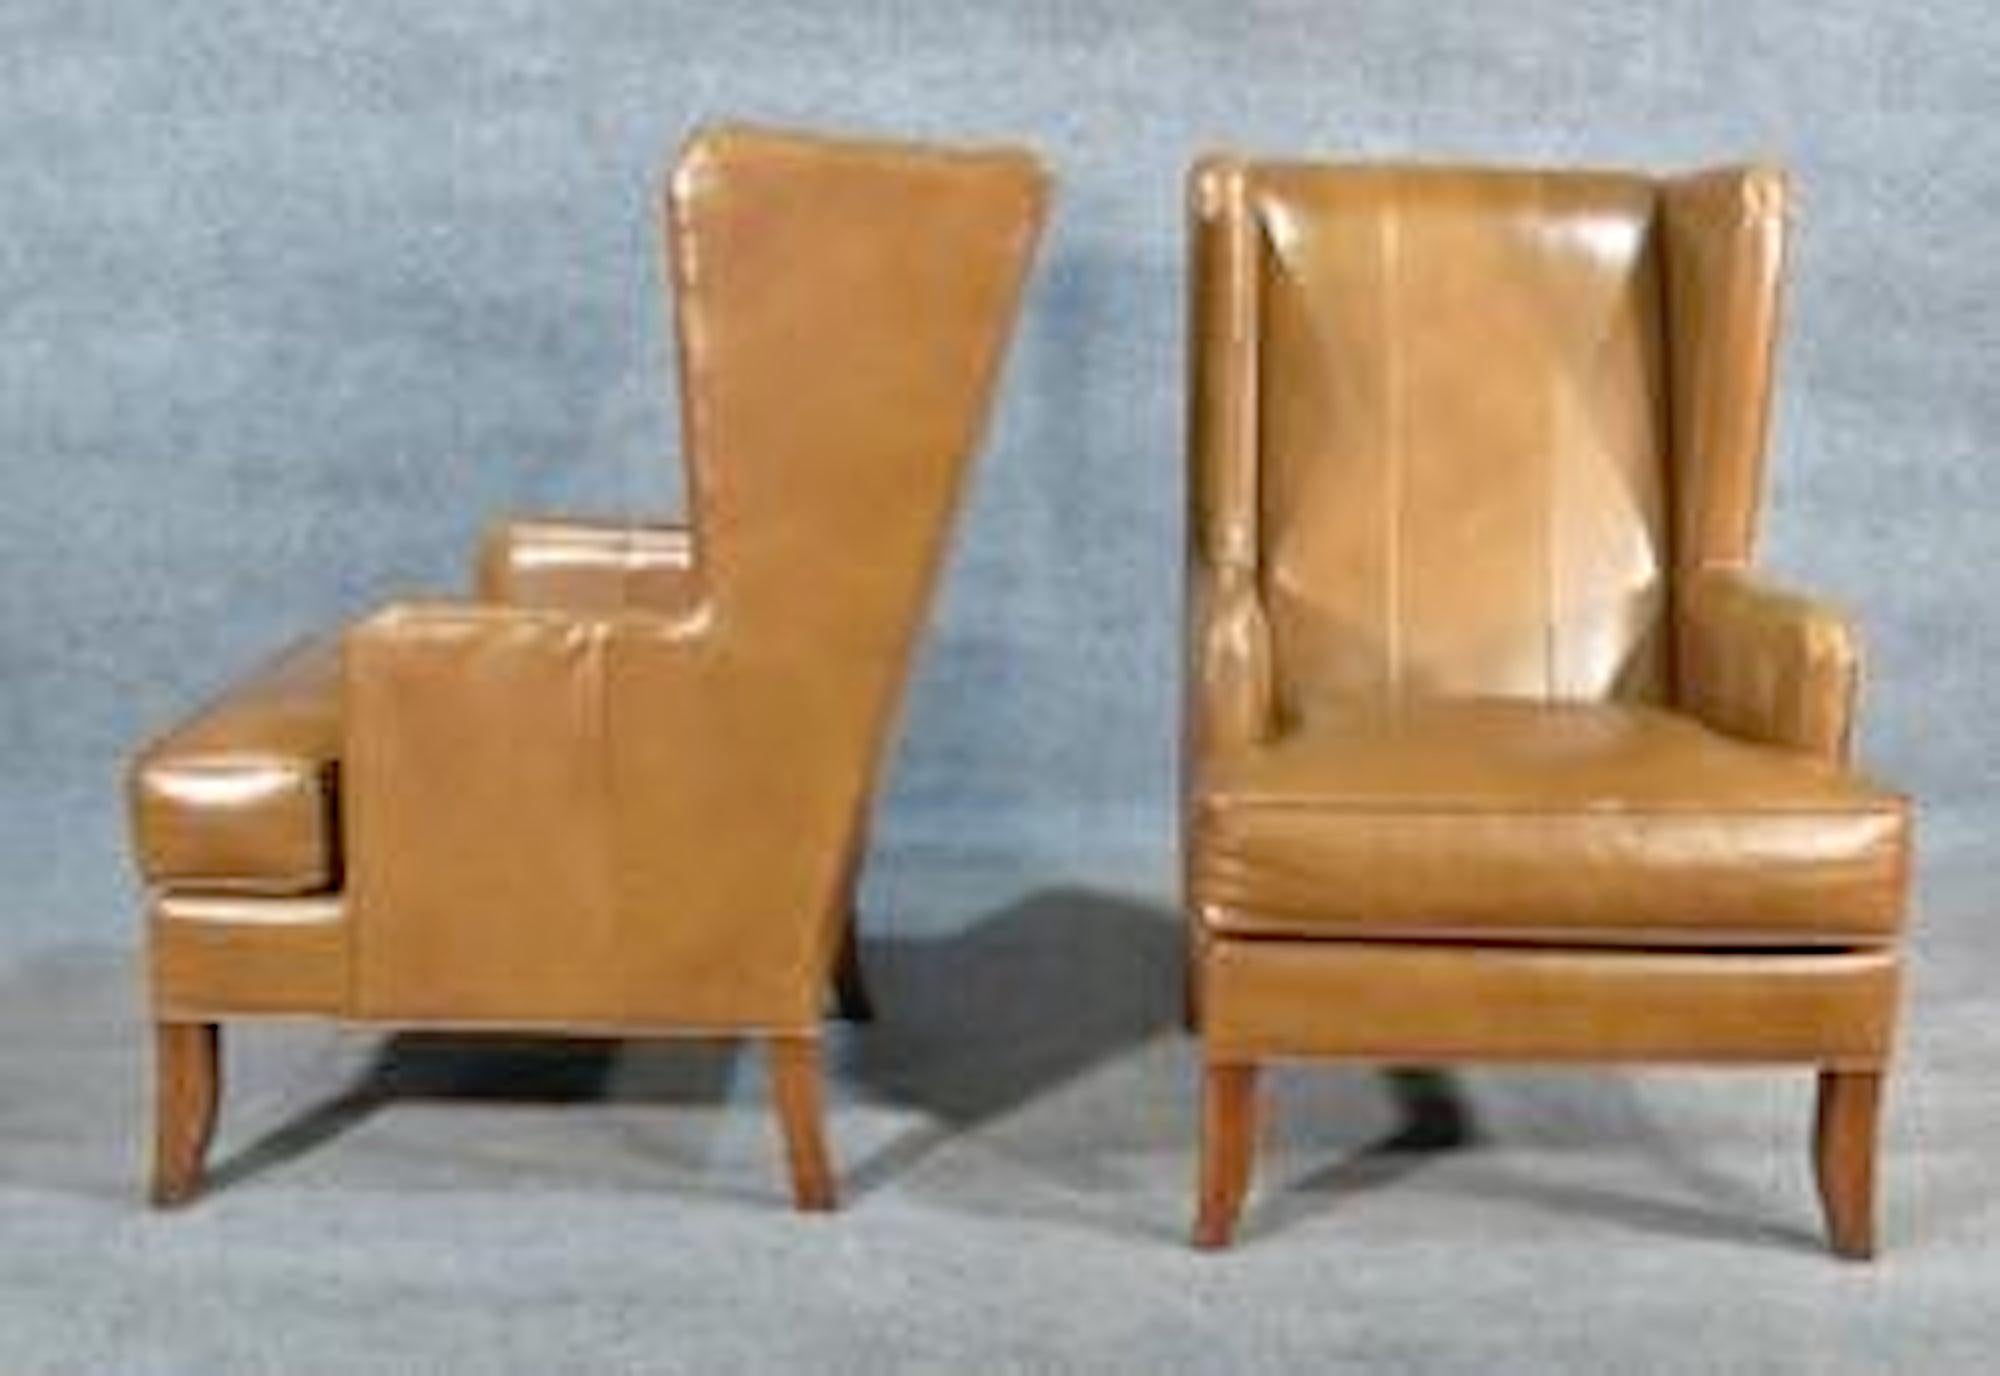 Pair of handsome leather wing chairs with wood feet.
(Please confirm item location - NY or NJ - with dealer).
  